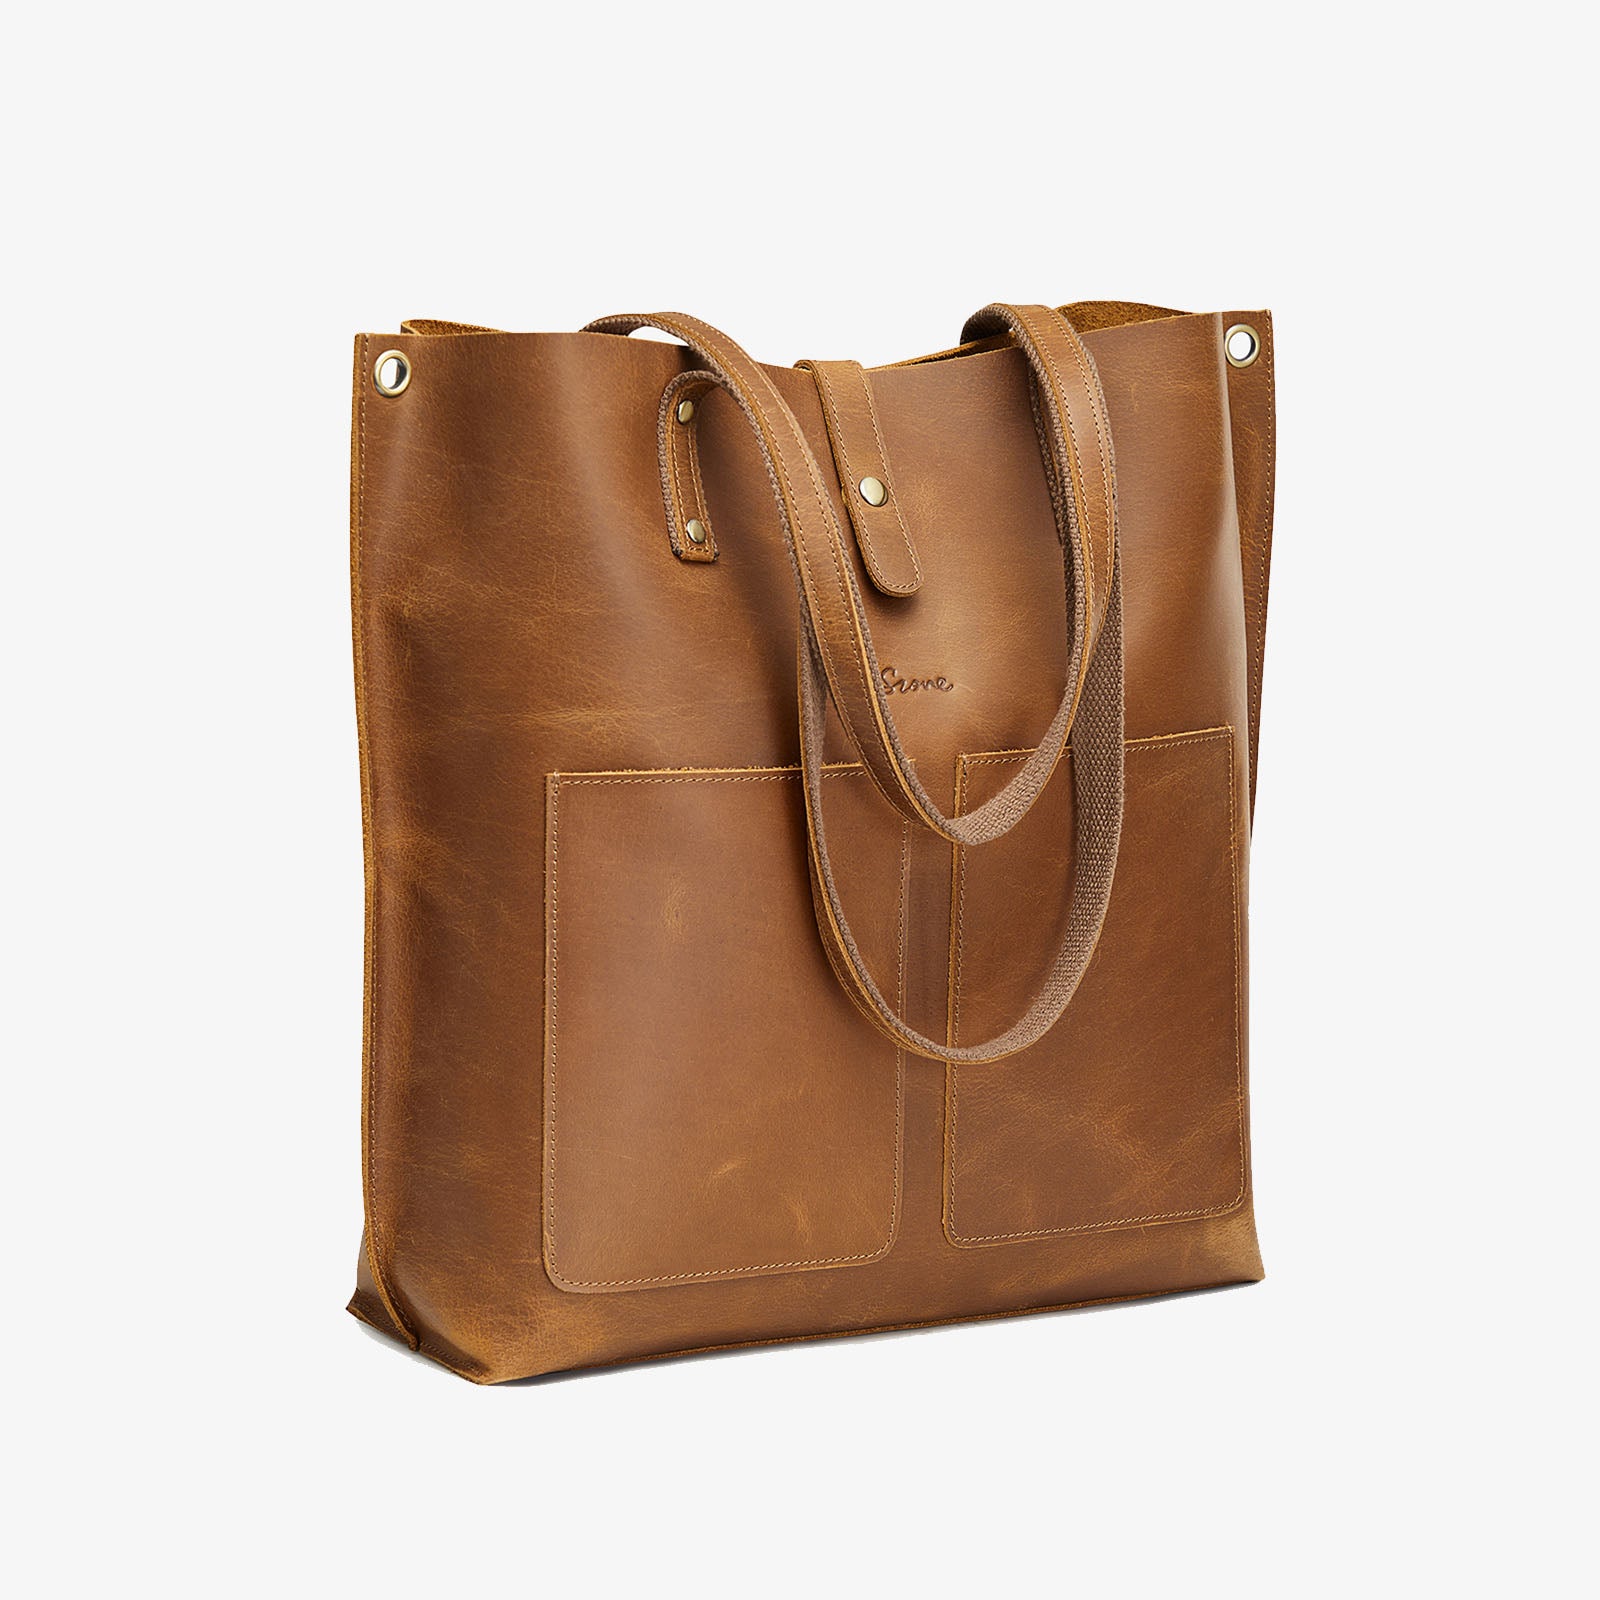 Women's Work Tote Bag with Front Pocket